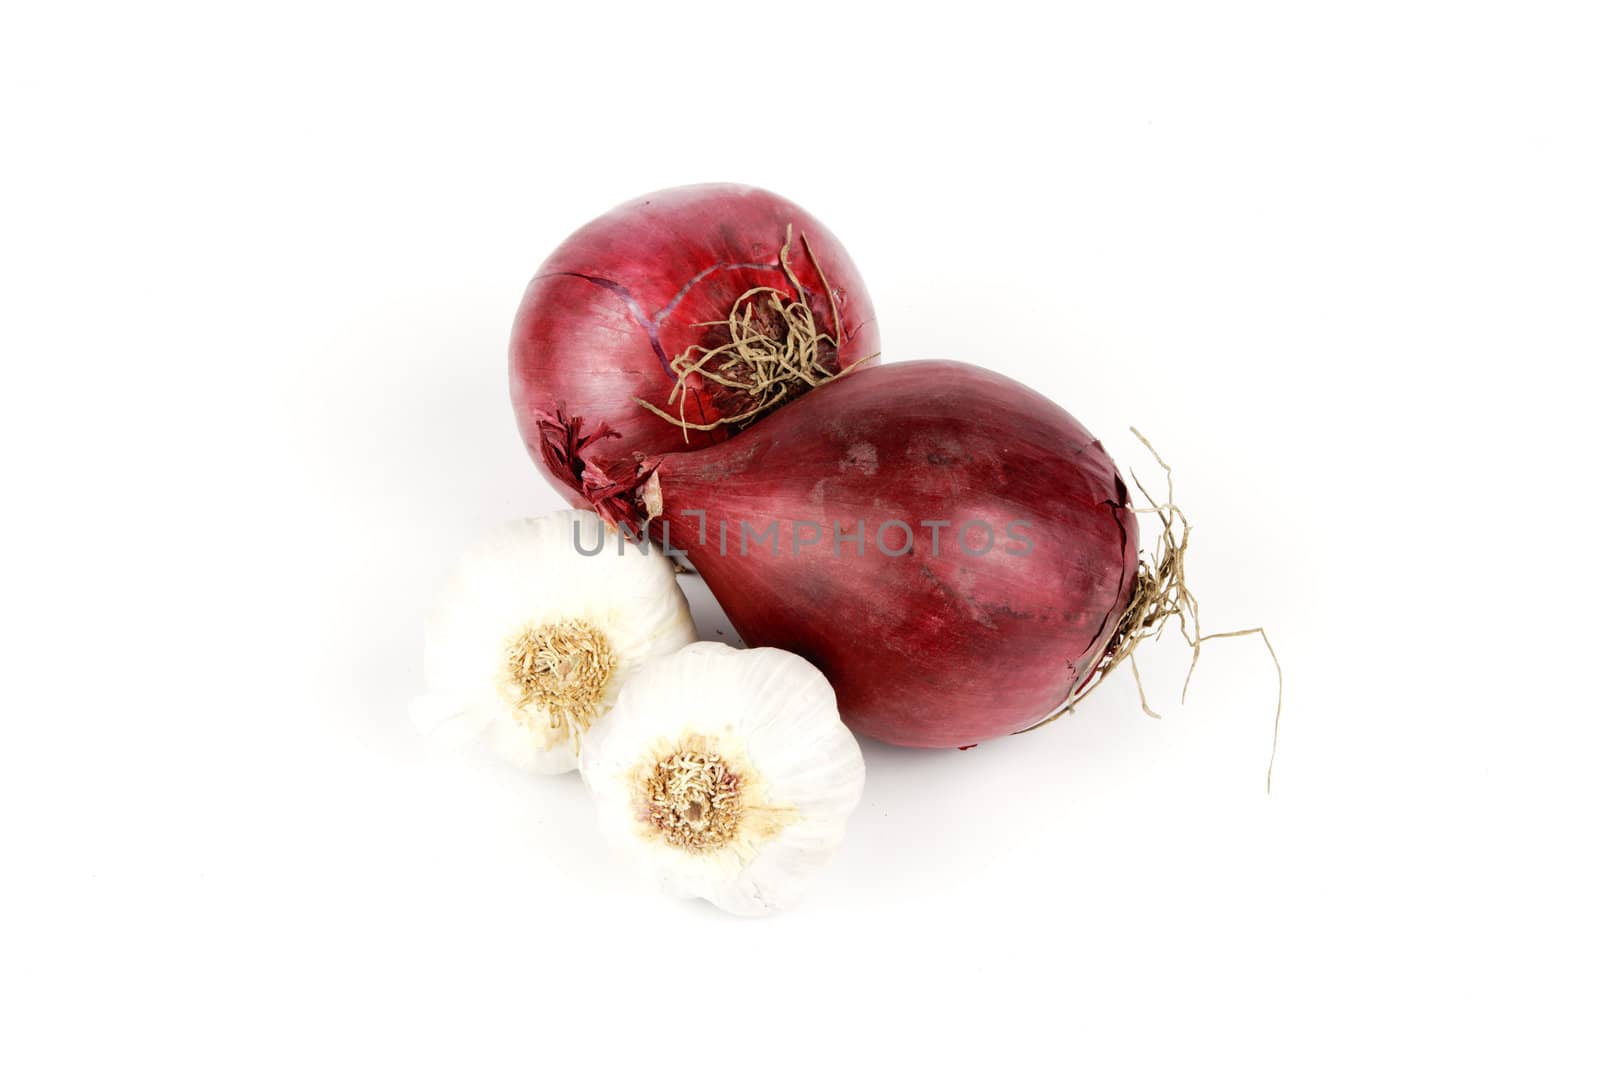 Two raw unpeeled red onions and two bulbs of garlic on a reflective white backgrounds